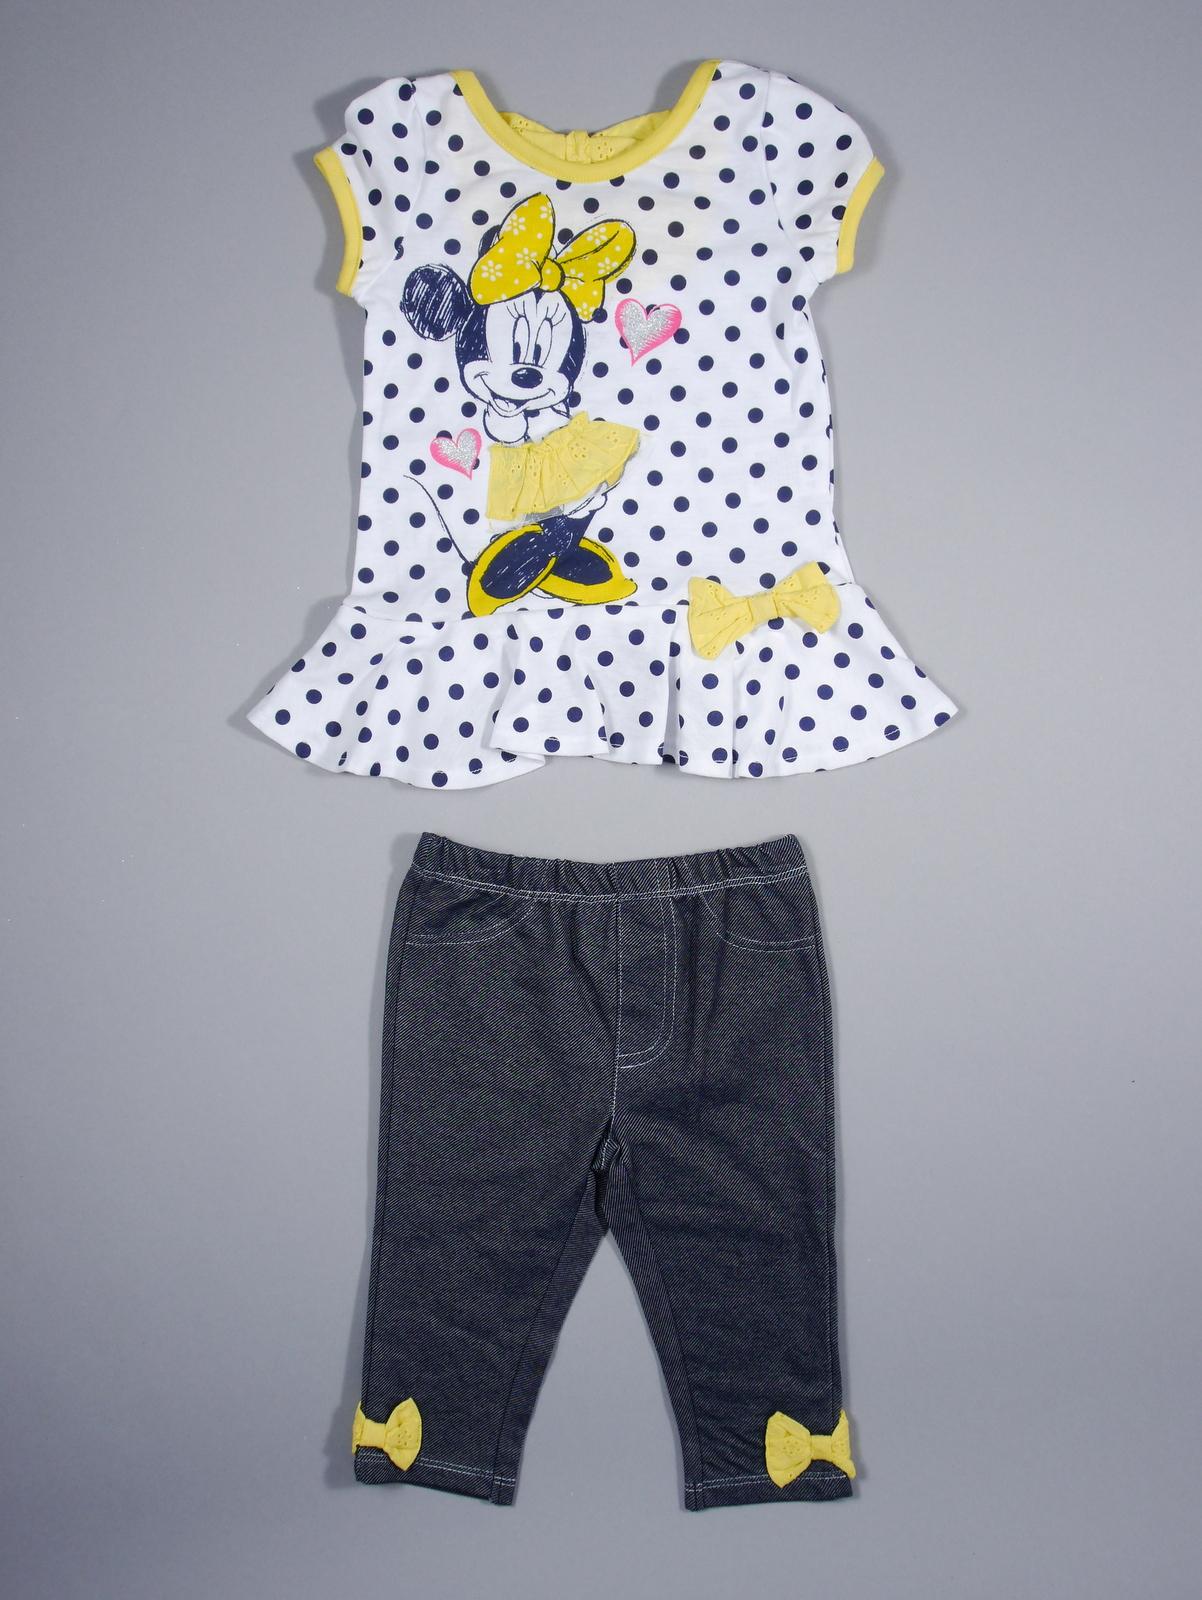 Disney Minnie Mouse Infant & Toddler Girl's Top & Jeggings - Polka Dots & Bows